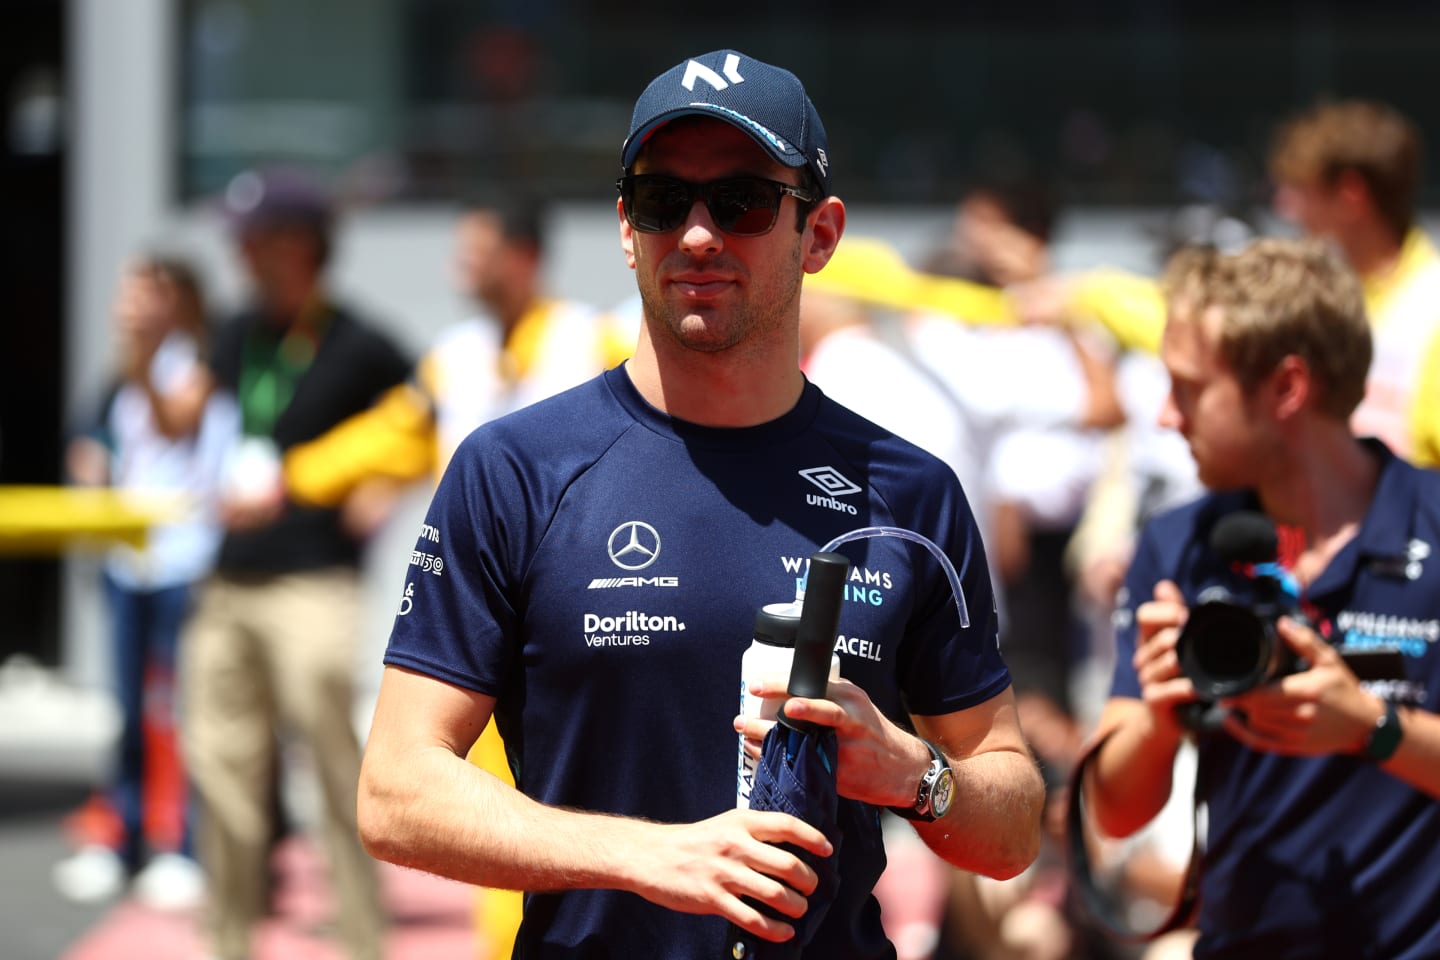 BARCELONA, SPAIN - MAY 22: Nicholas Latifi of Canada and Williams looks on from the drivers parade prior to the F1 Grand Prix of Spain at Circuit de Barcelona-Catalunya on May 22, 2022 in Barcelona, Spain. (Photo by Lars Baron/Getty Images)